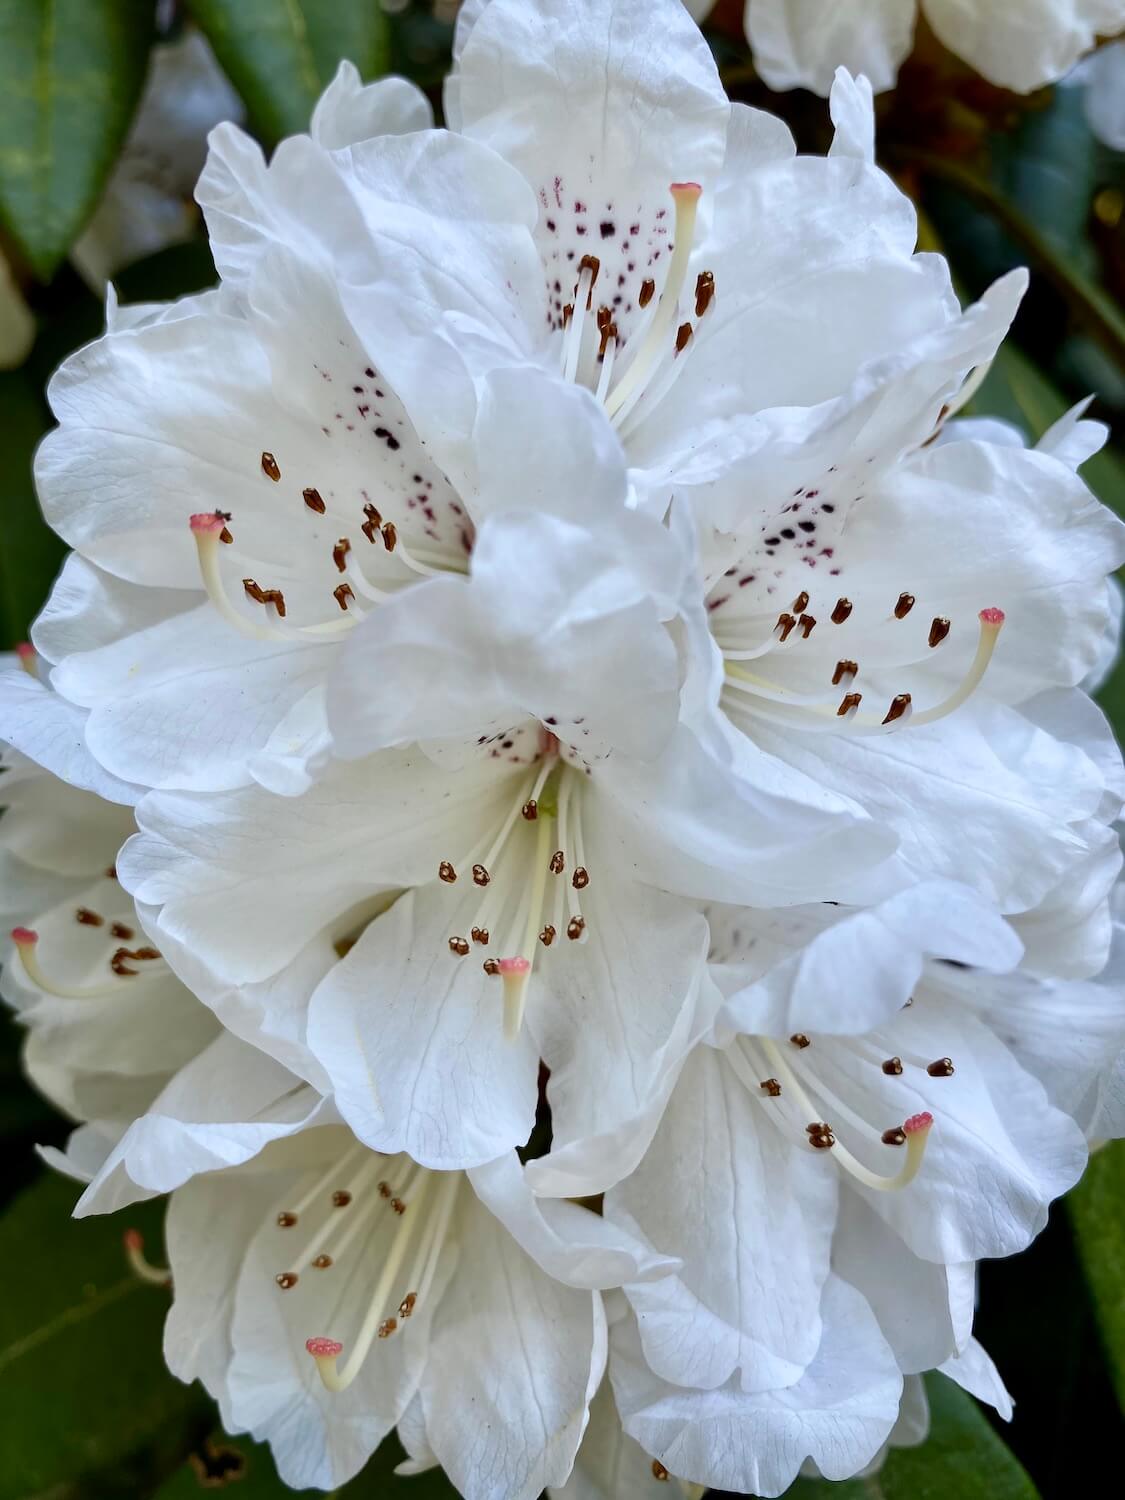 A brilliant white rhododendron bloom with dark purple specks in the middle bursts alive in this Spring shot at the rhododendron species botanical garden, near Seattle, Washington.